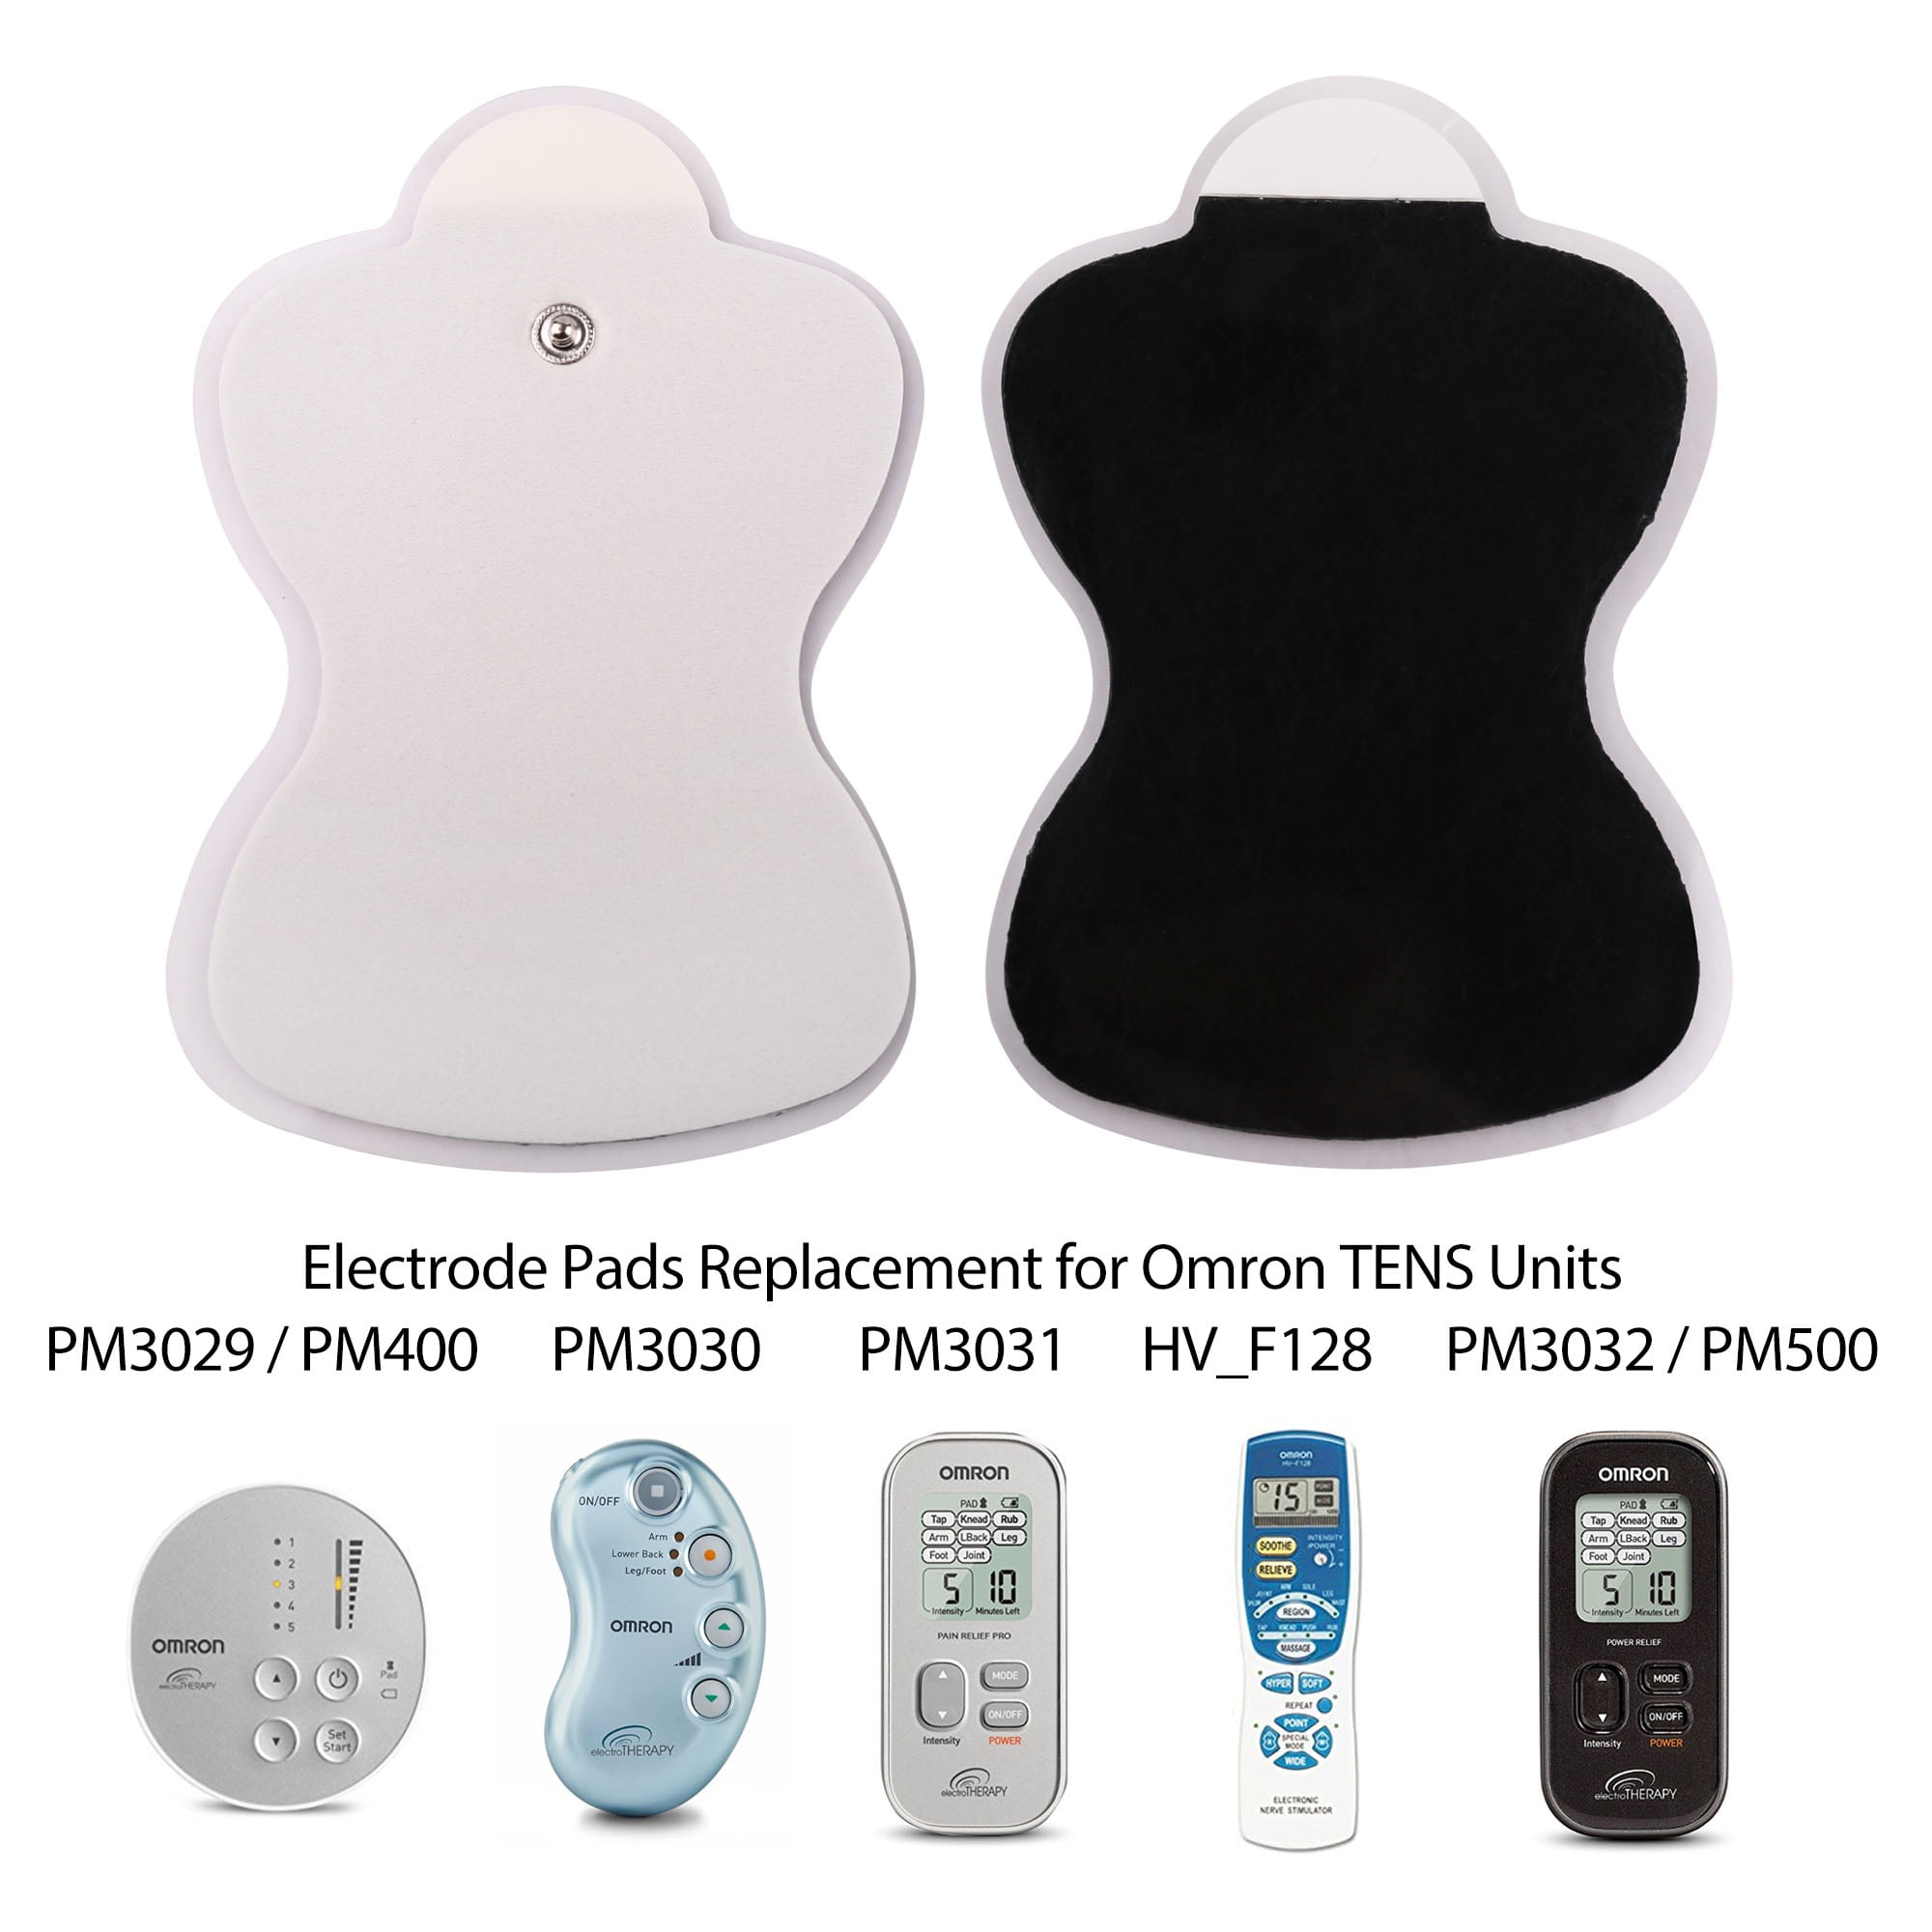 Omron E4 Gel Pad Replacement Cable Companies With TENS Unit